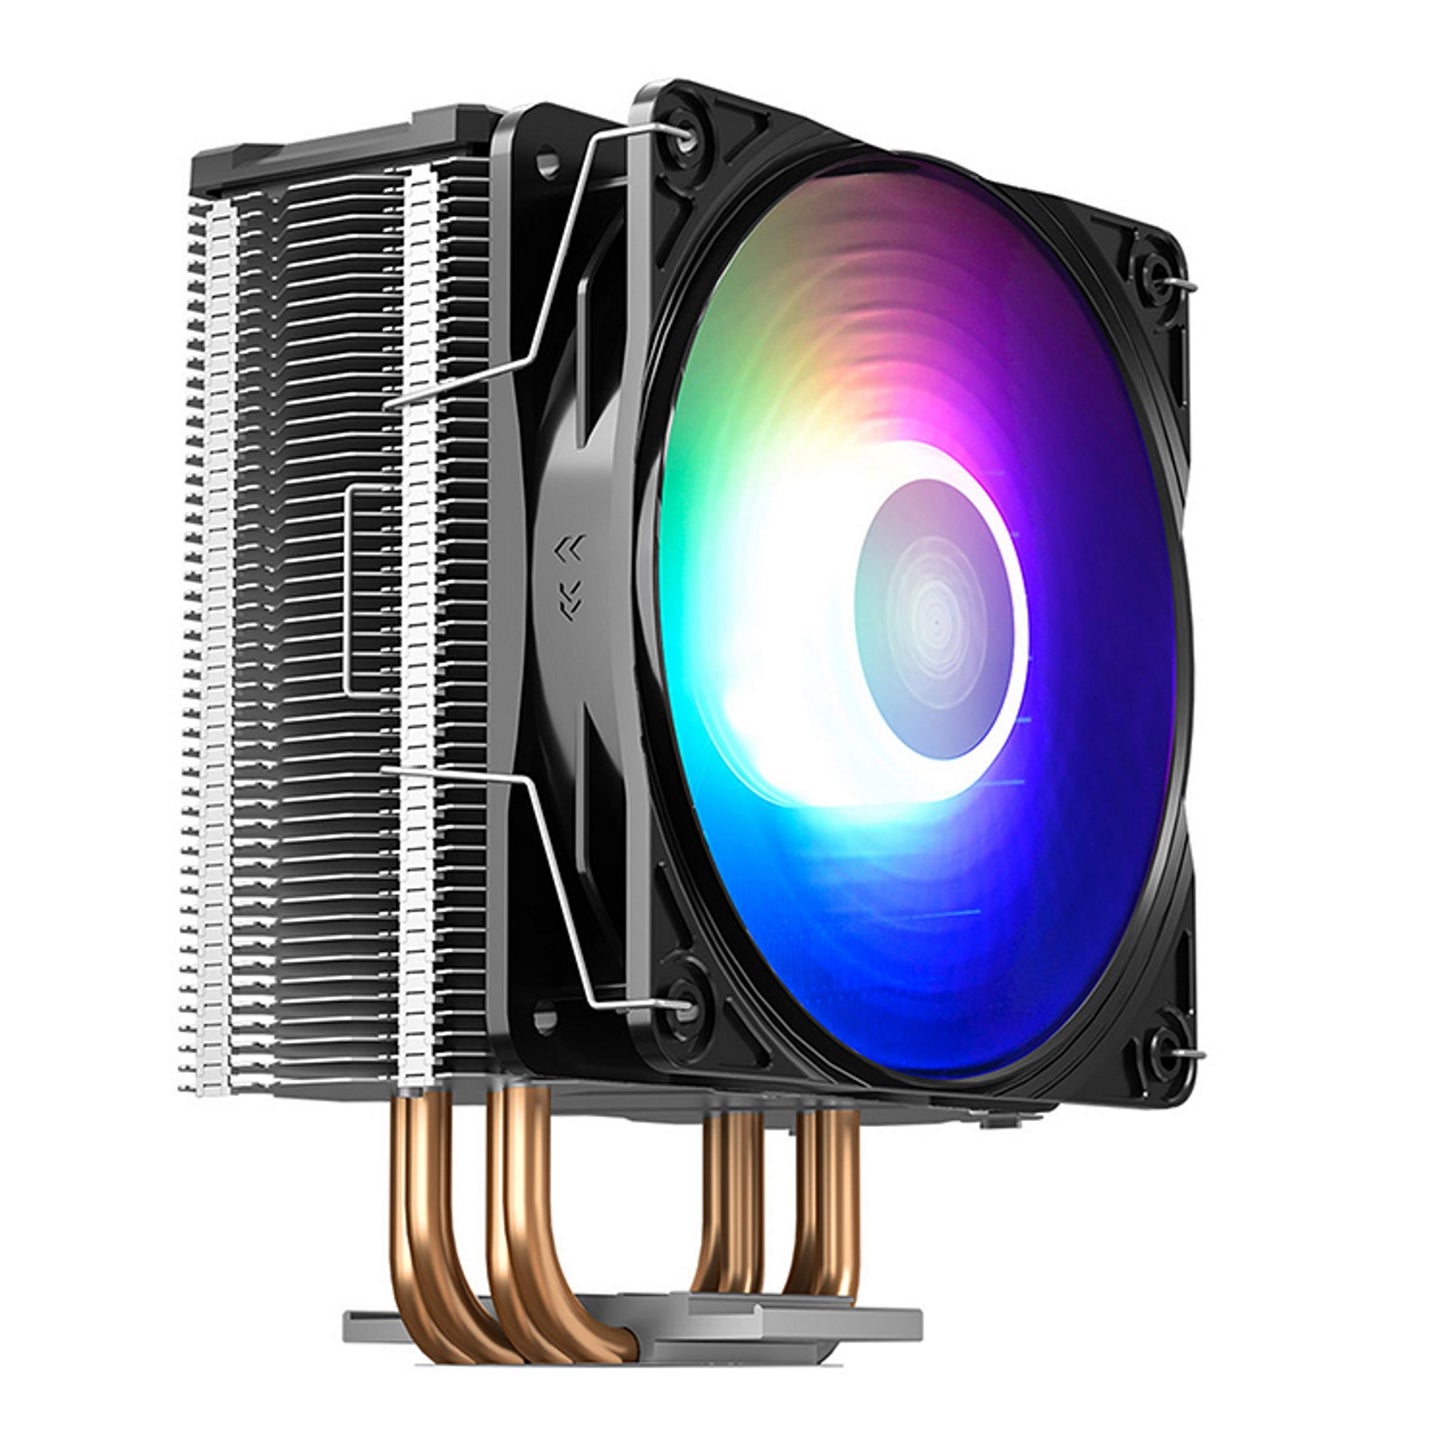 DeepCool GAMMAXX GT A-RGB Universal Socket 120mm PWM Addressable LED Fan PC CPU Cooler with Wired RGB Controller